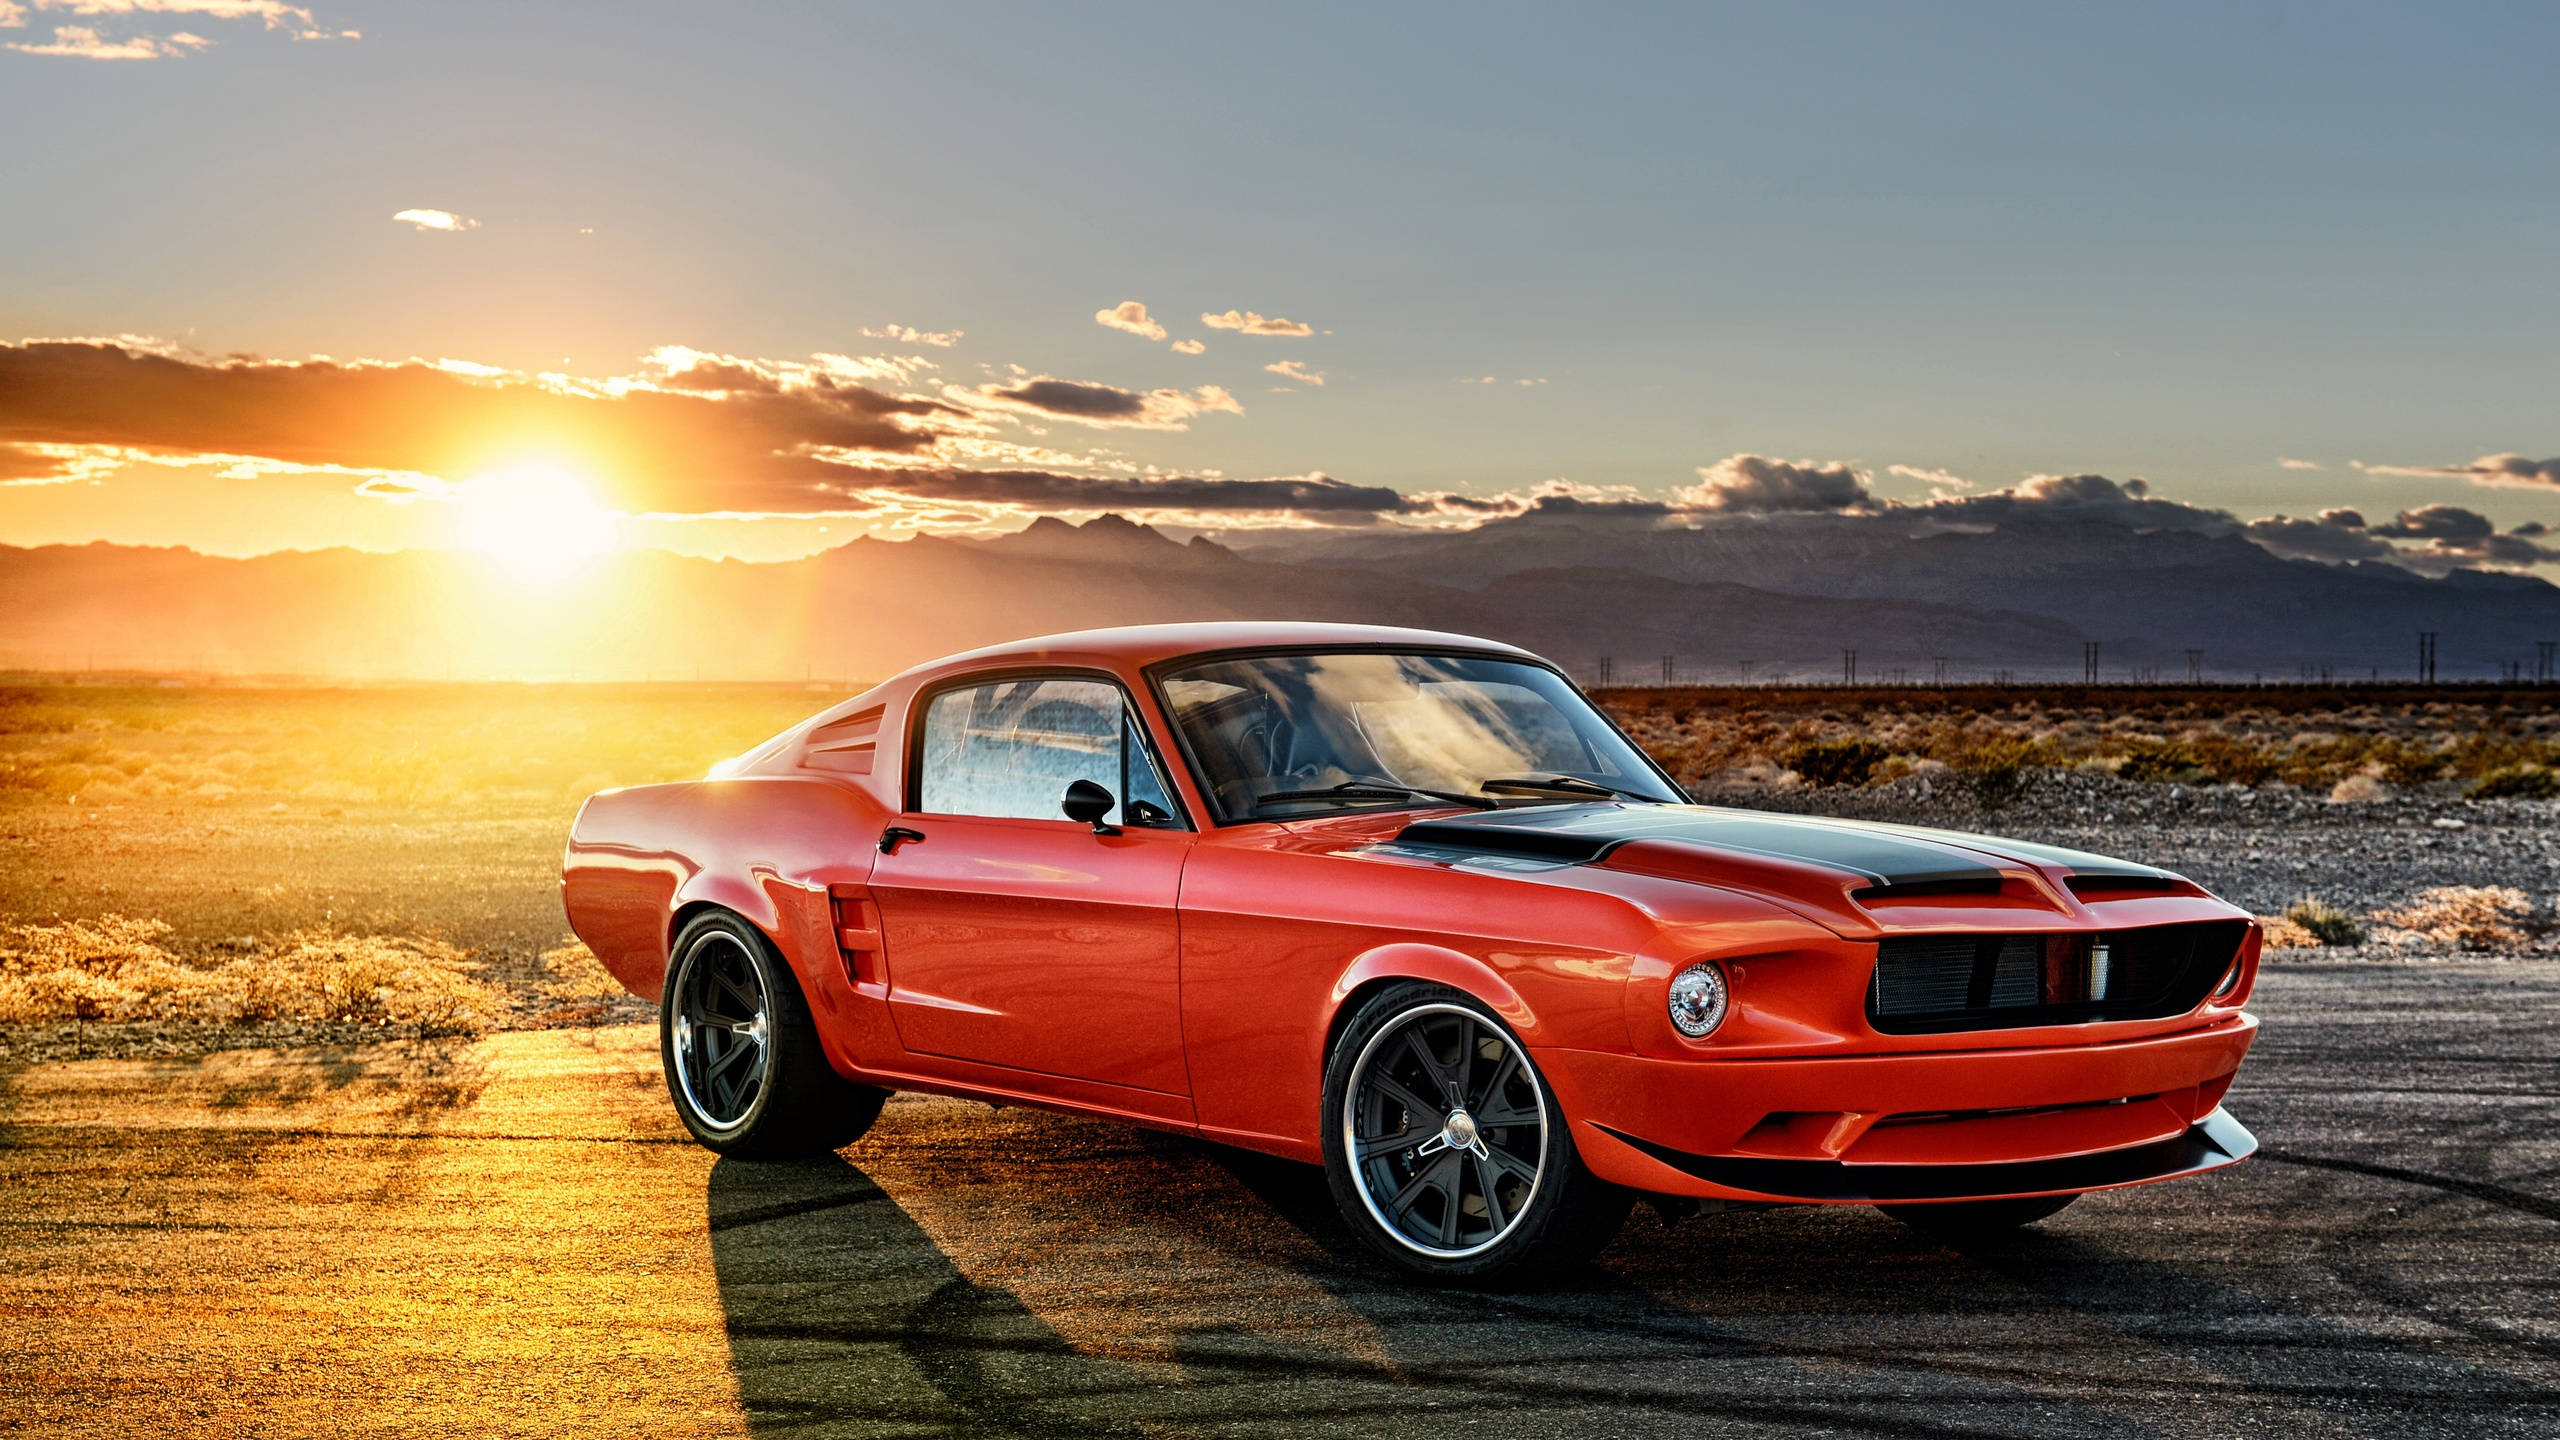 2560x1440 Car Red Ford Mustang Wallpaper